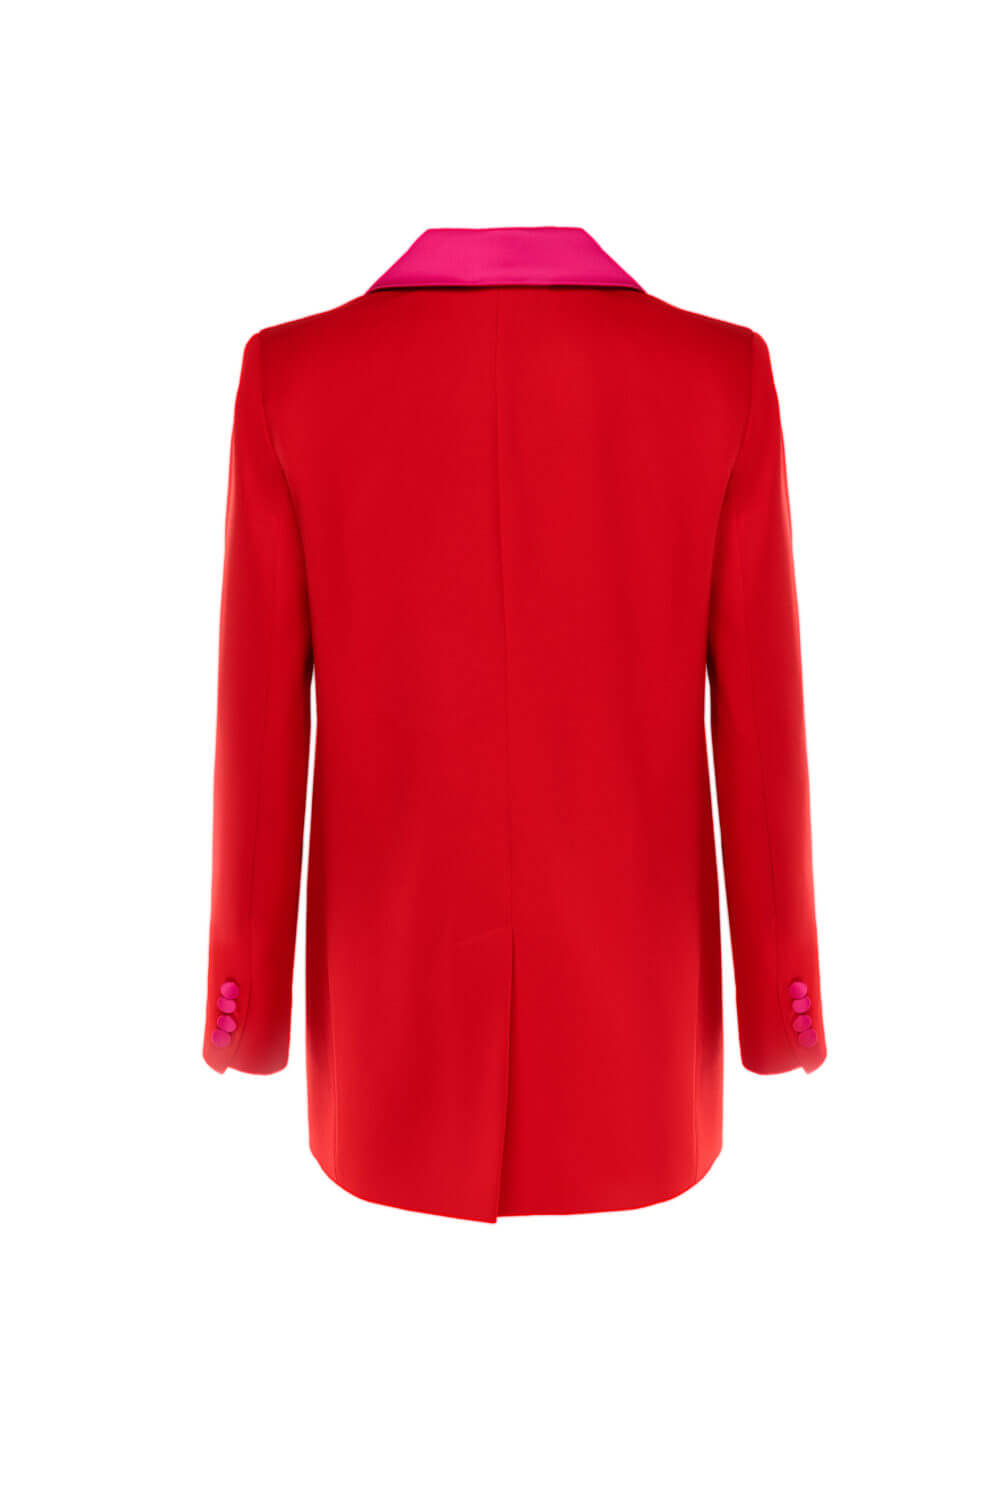 Double-breasted structured red blazer with pink elements